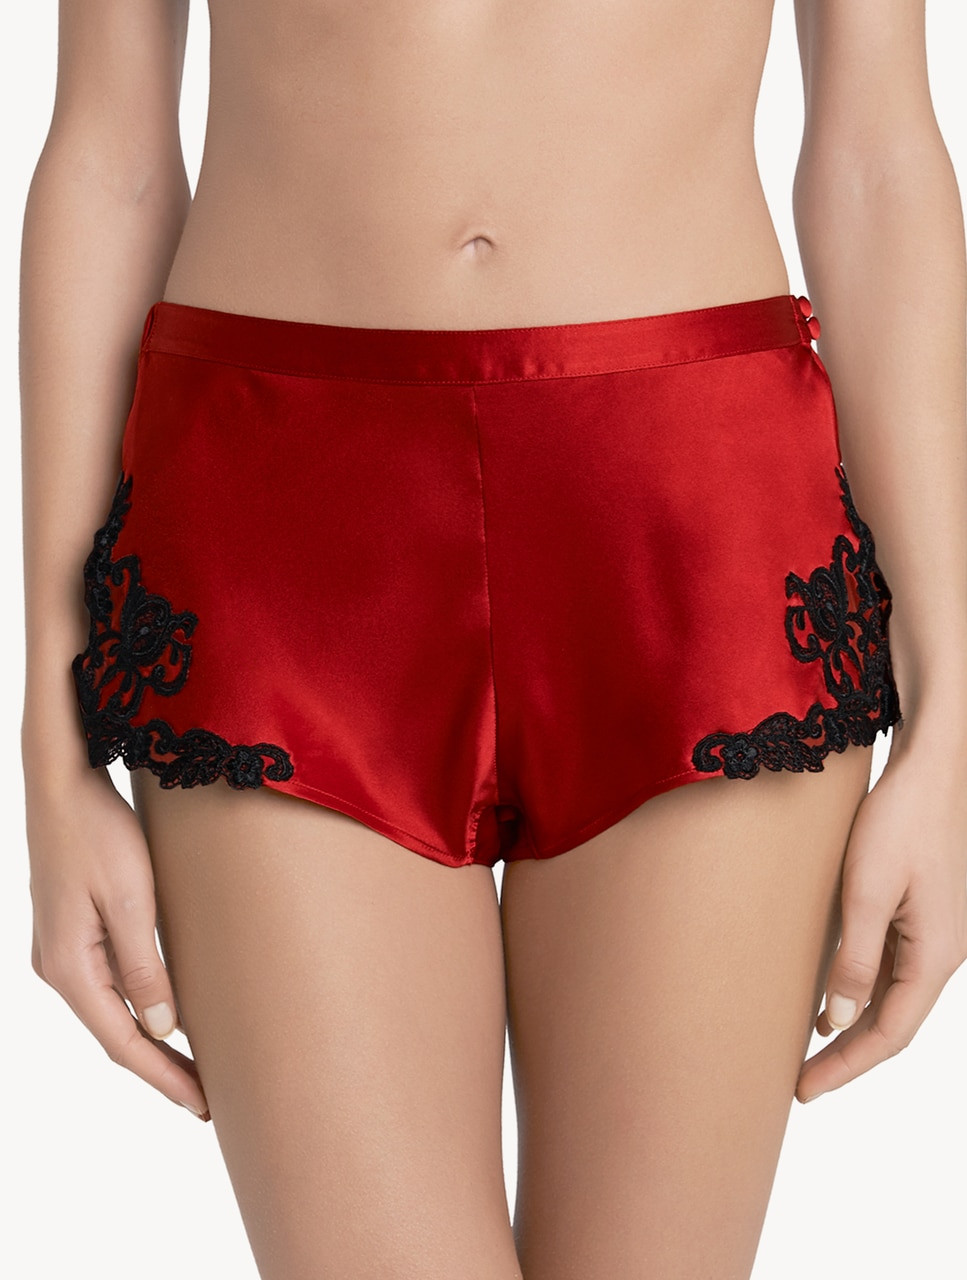 Red French knickers with frastaglio